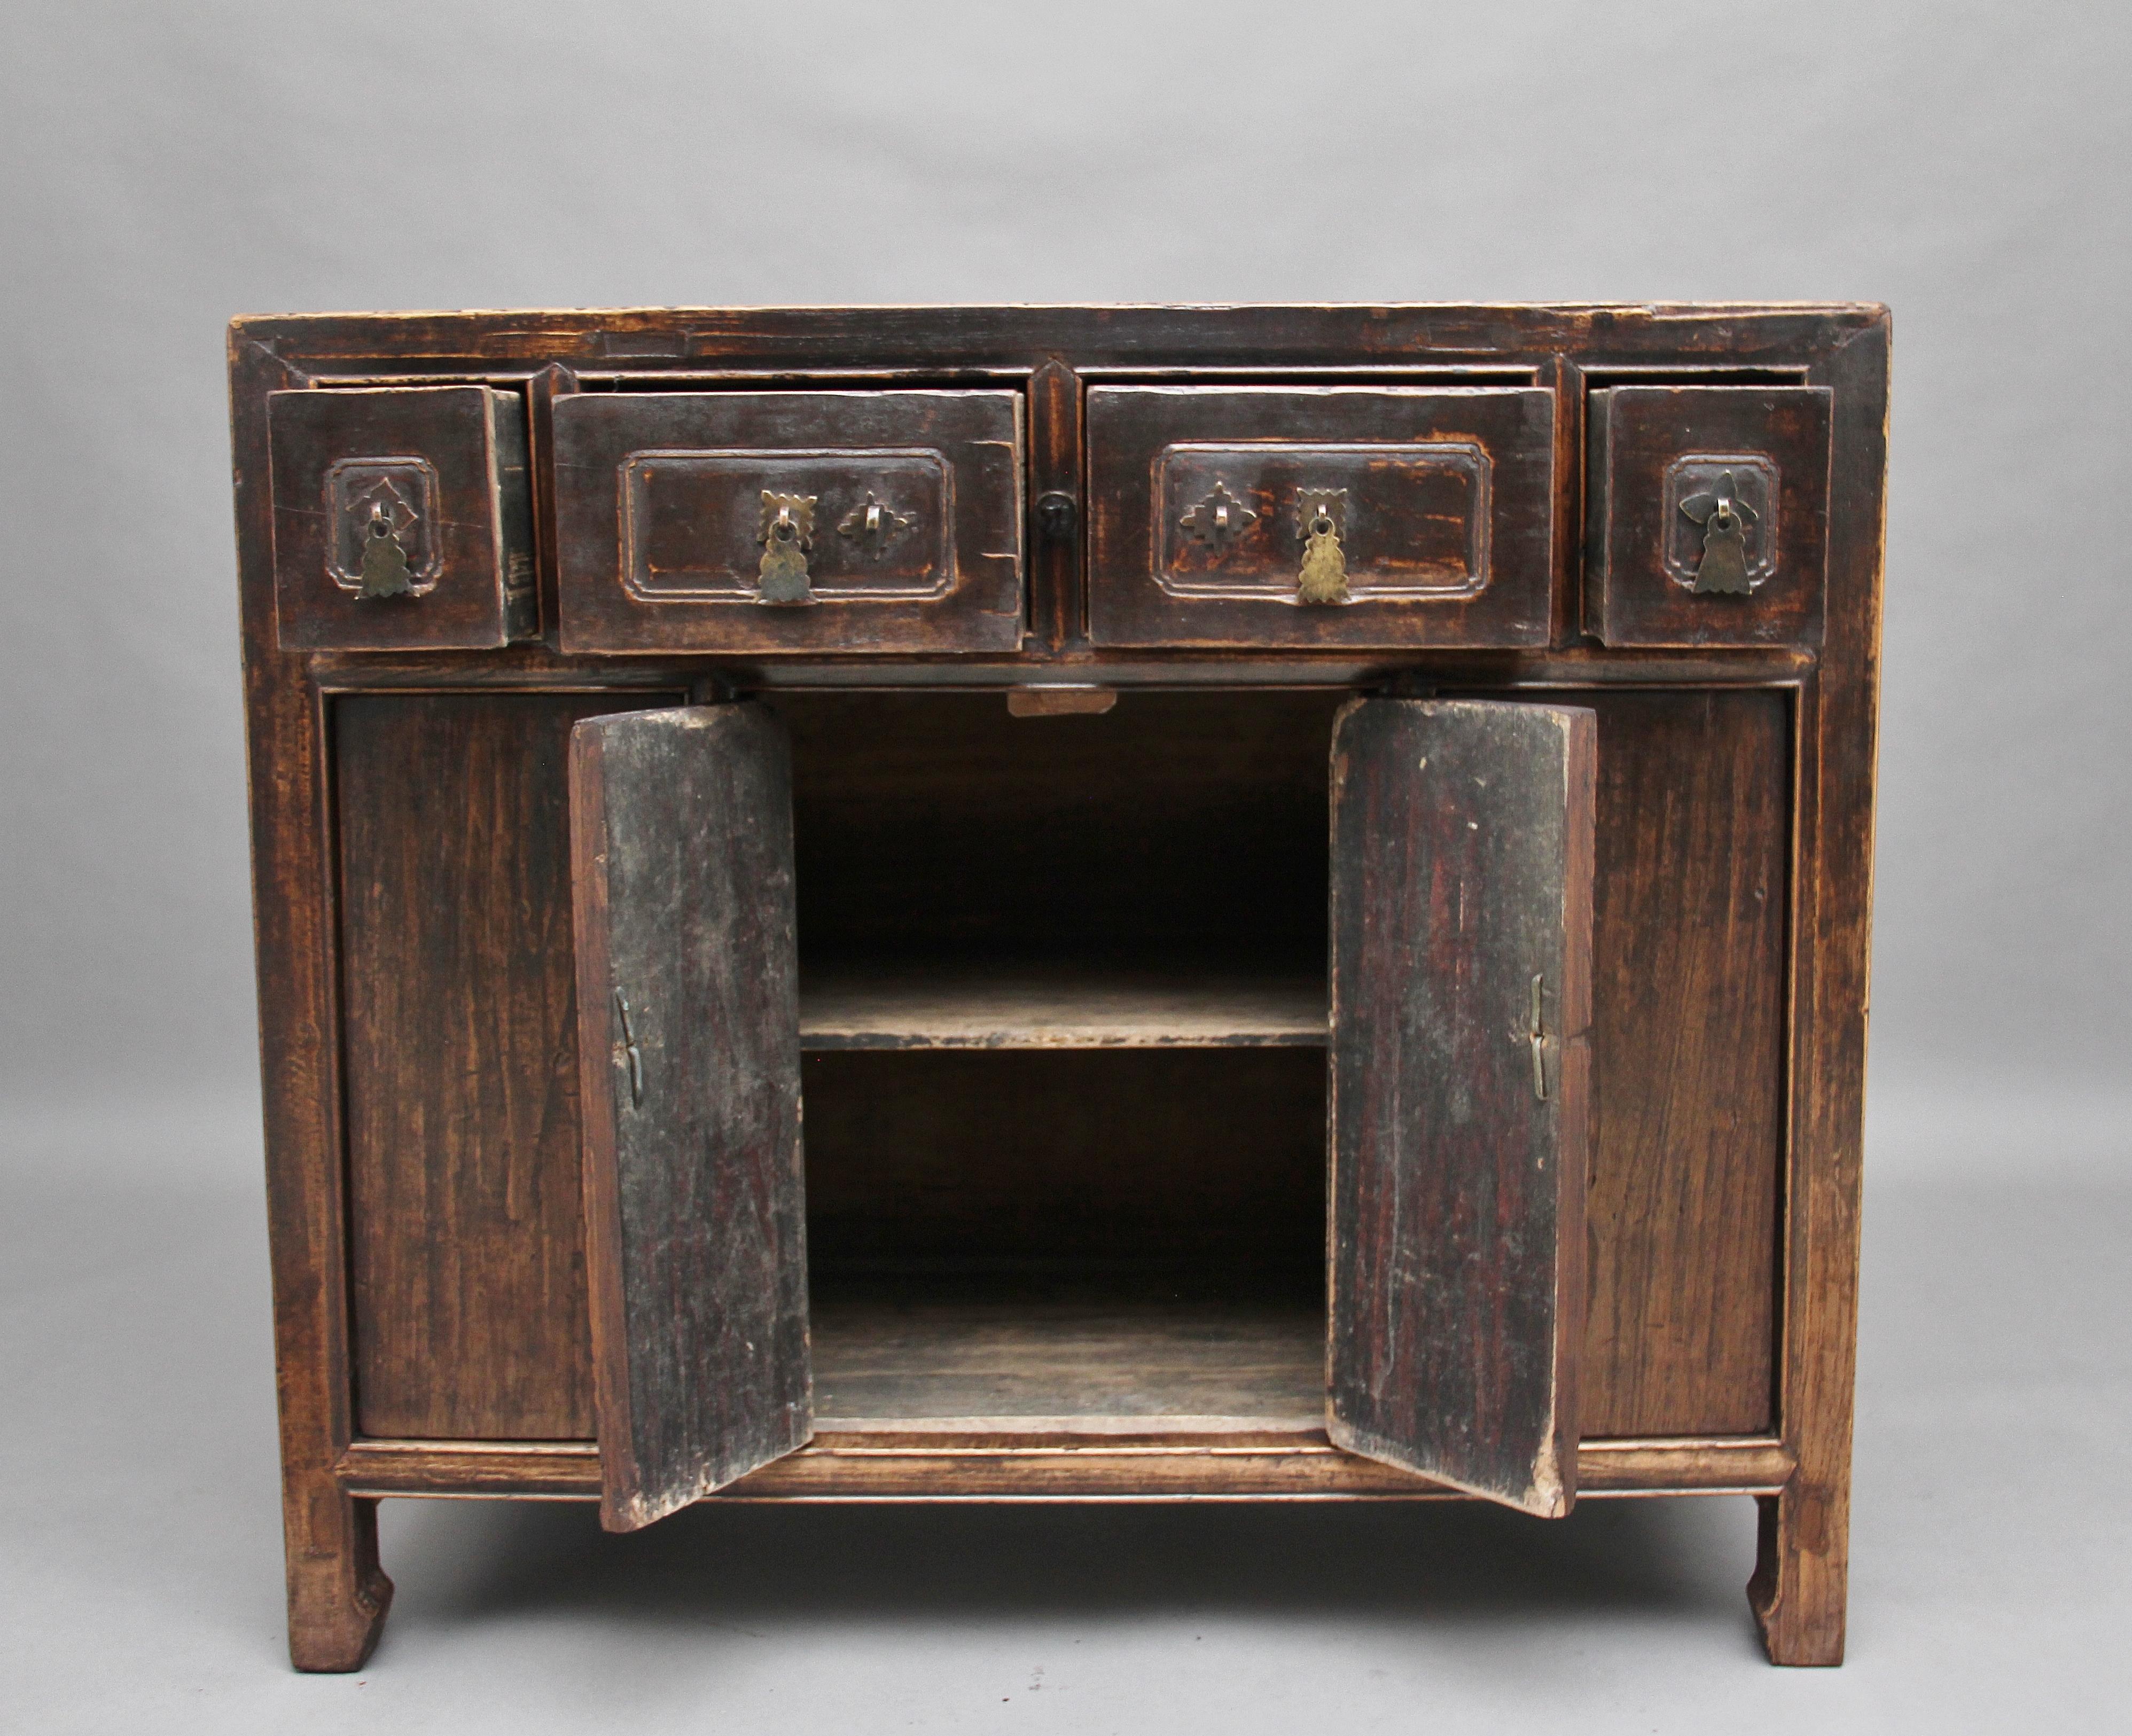 19th century Chinese elm dresser / cabinet, having a selection of four drawers at the top with carved decoration on the drawer fronts, original brass handles, four door cupboard below opening to reveal a fixed single shelf inside, standing on scroll